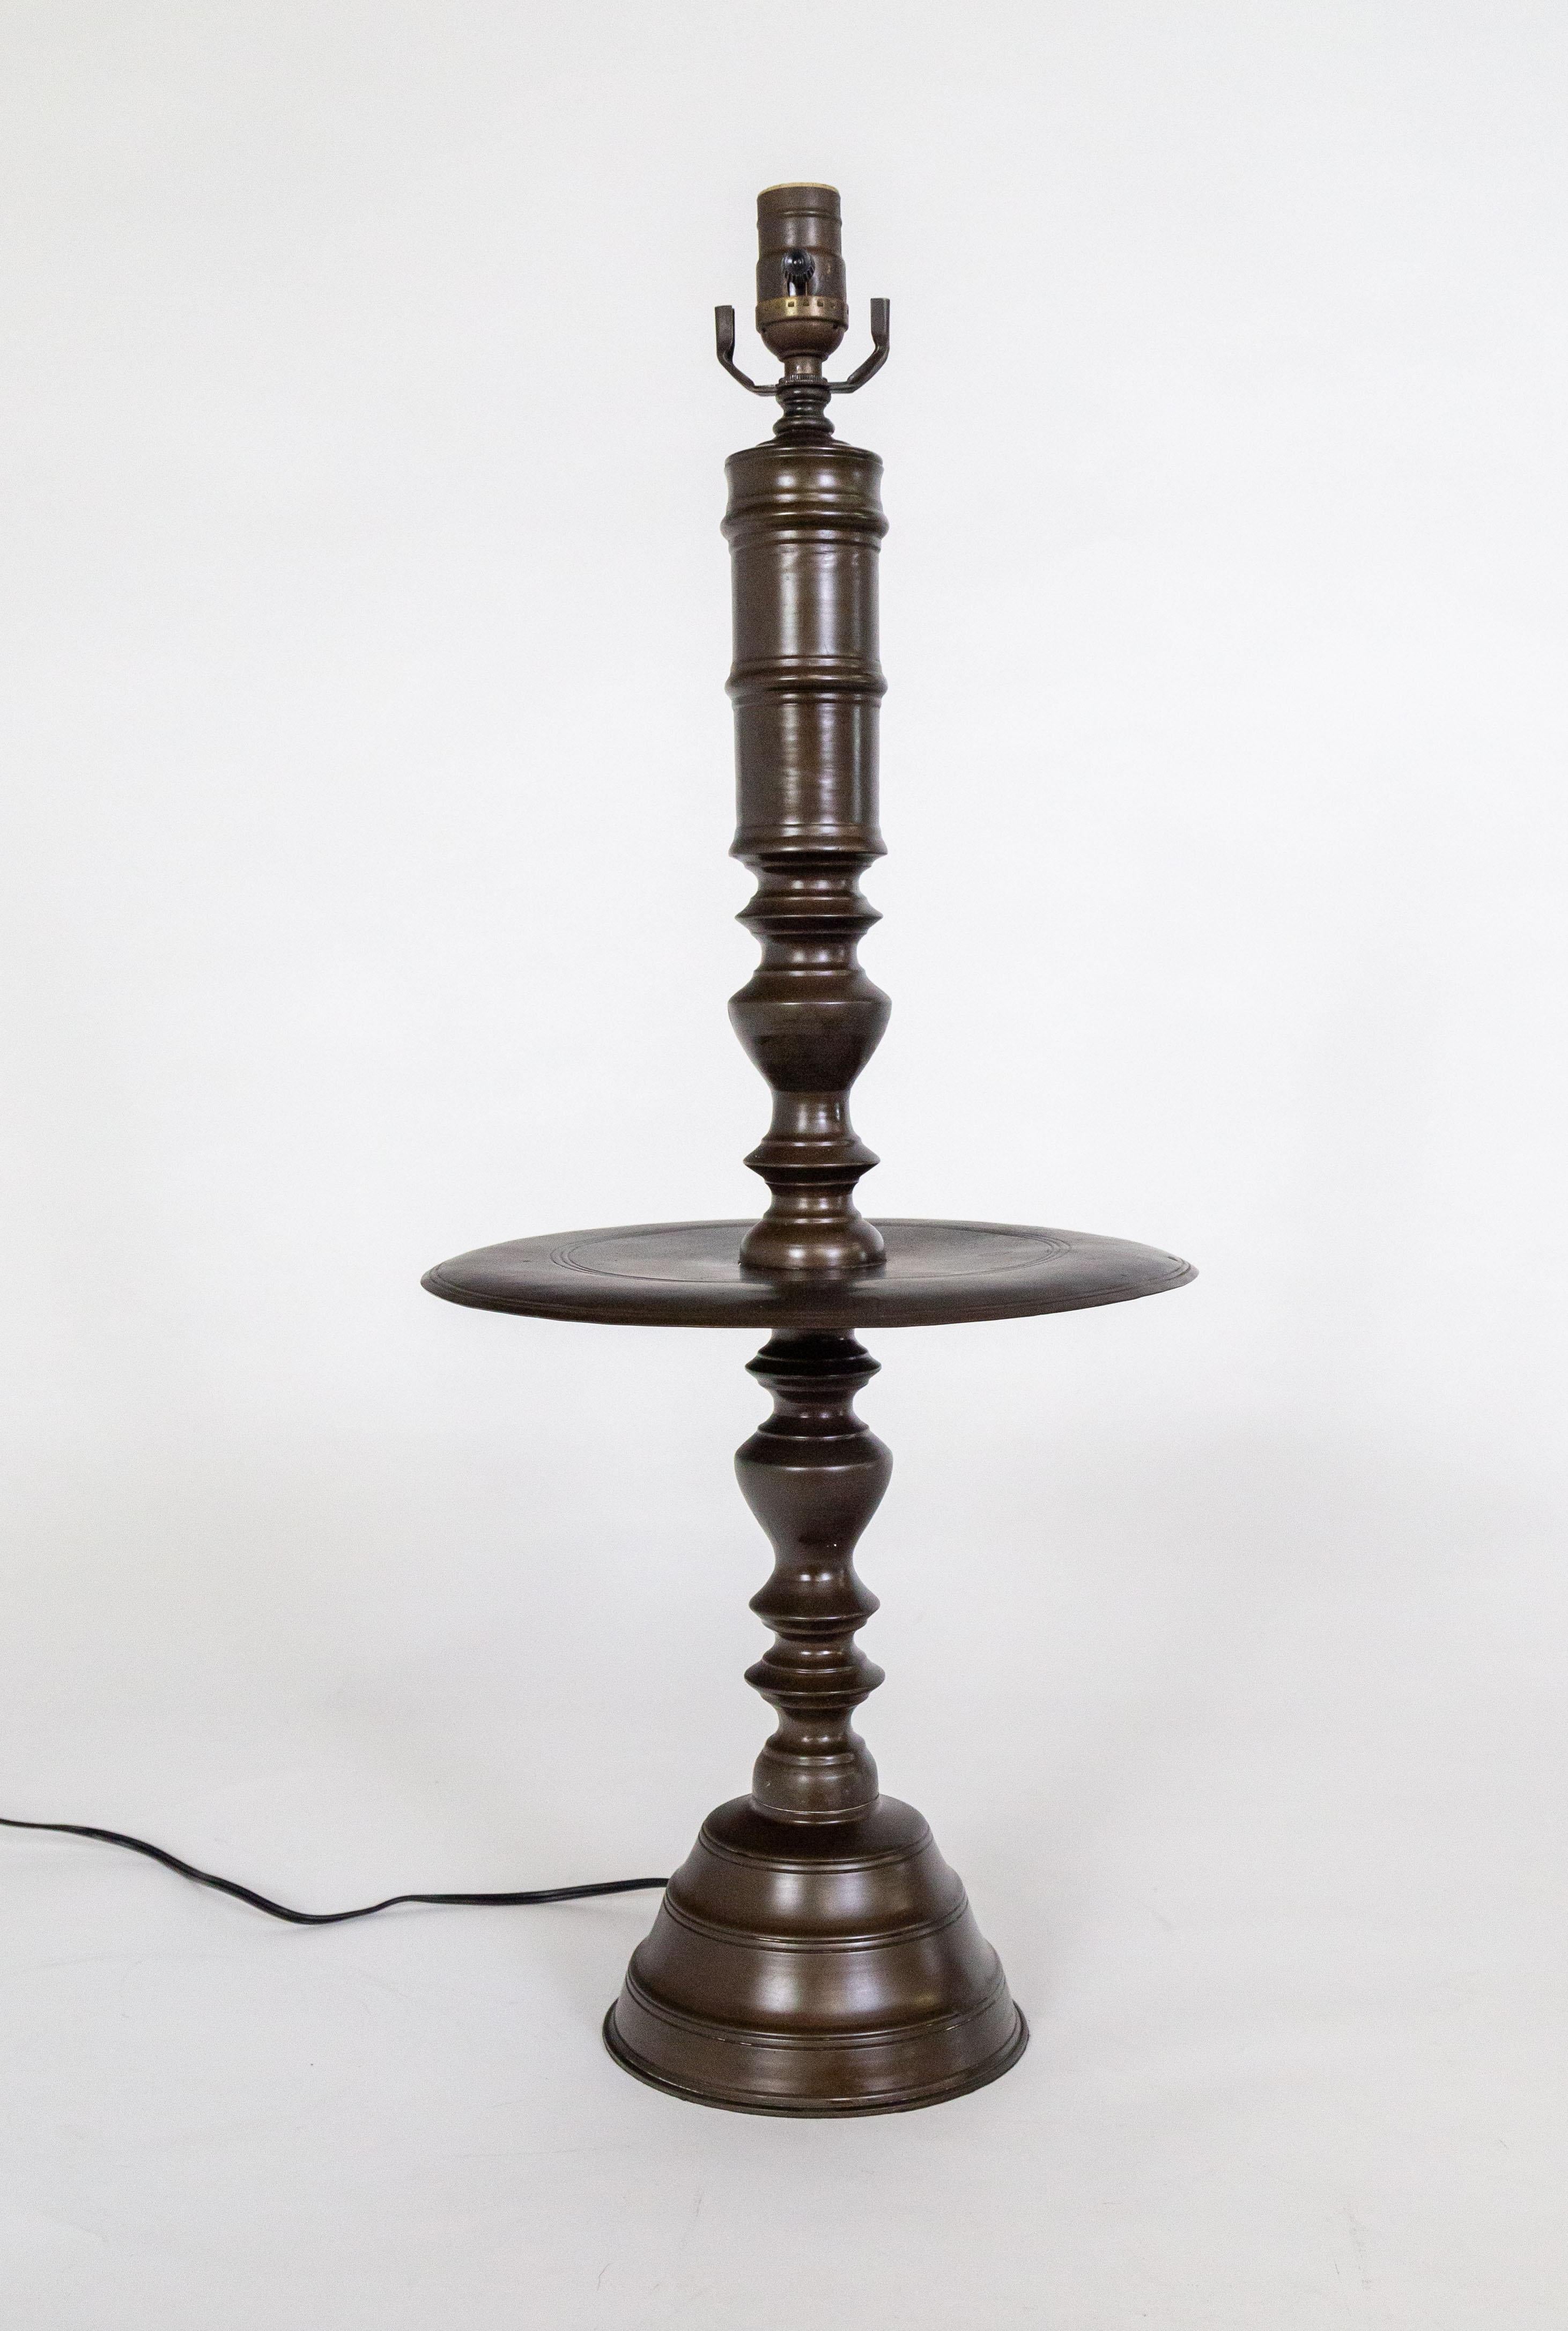 A Dutch Colonial lamp with a dish in the center of the turned-style, cast bronze body. It has a rich, dark, oil-rubbed bronze patina and balanced proportions. The center try can remain bare, but is large enough to be used to place various objects.